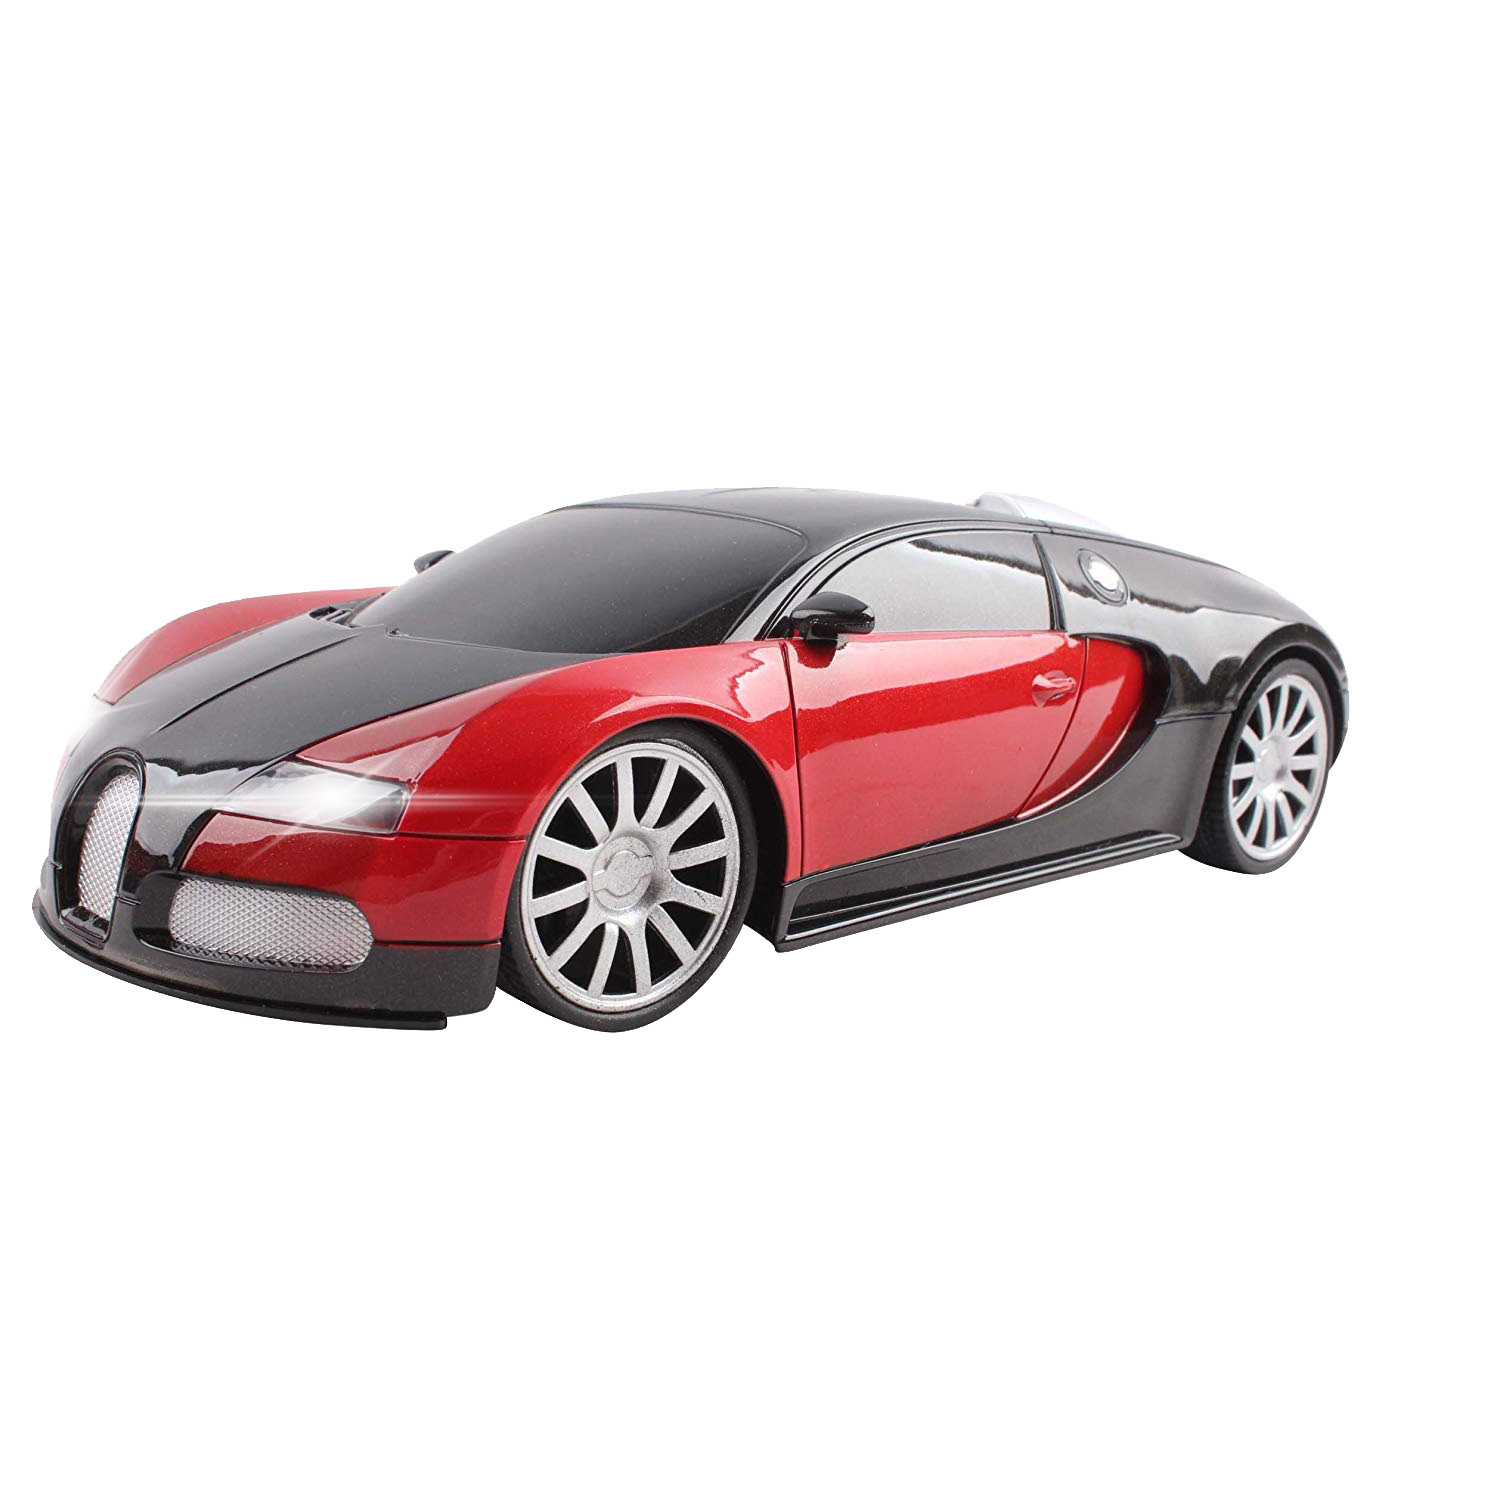 Super Exotic RC Car 1:16 Scale Remote Control Sports Cars For Kids with Working Headlights Easy To Operate Toy Race Vehicle (Color May Vary)